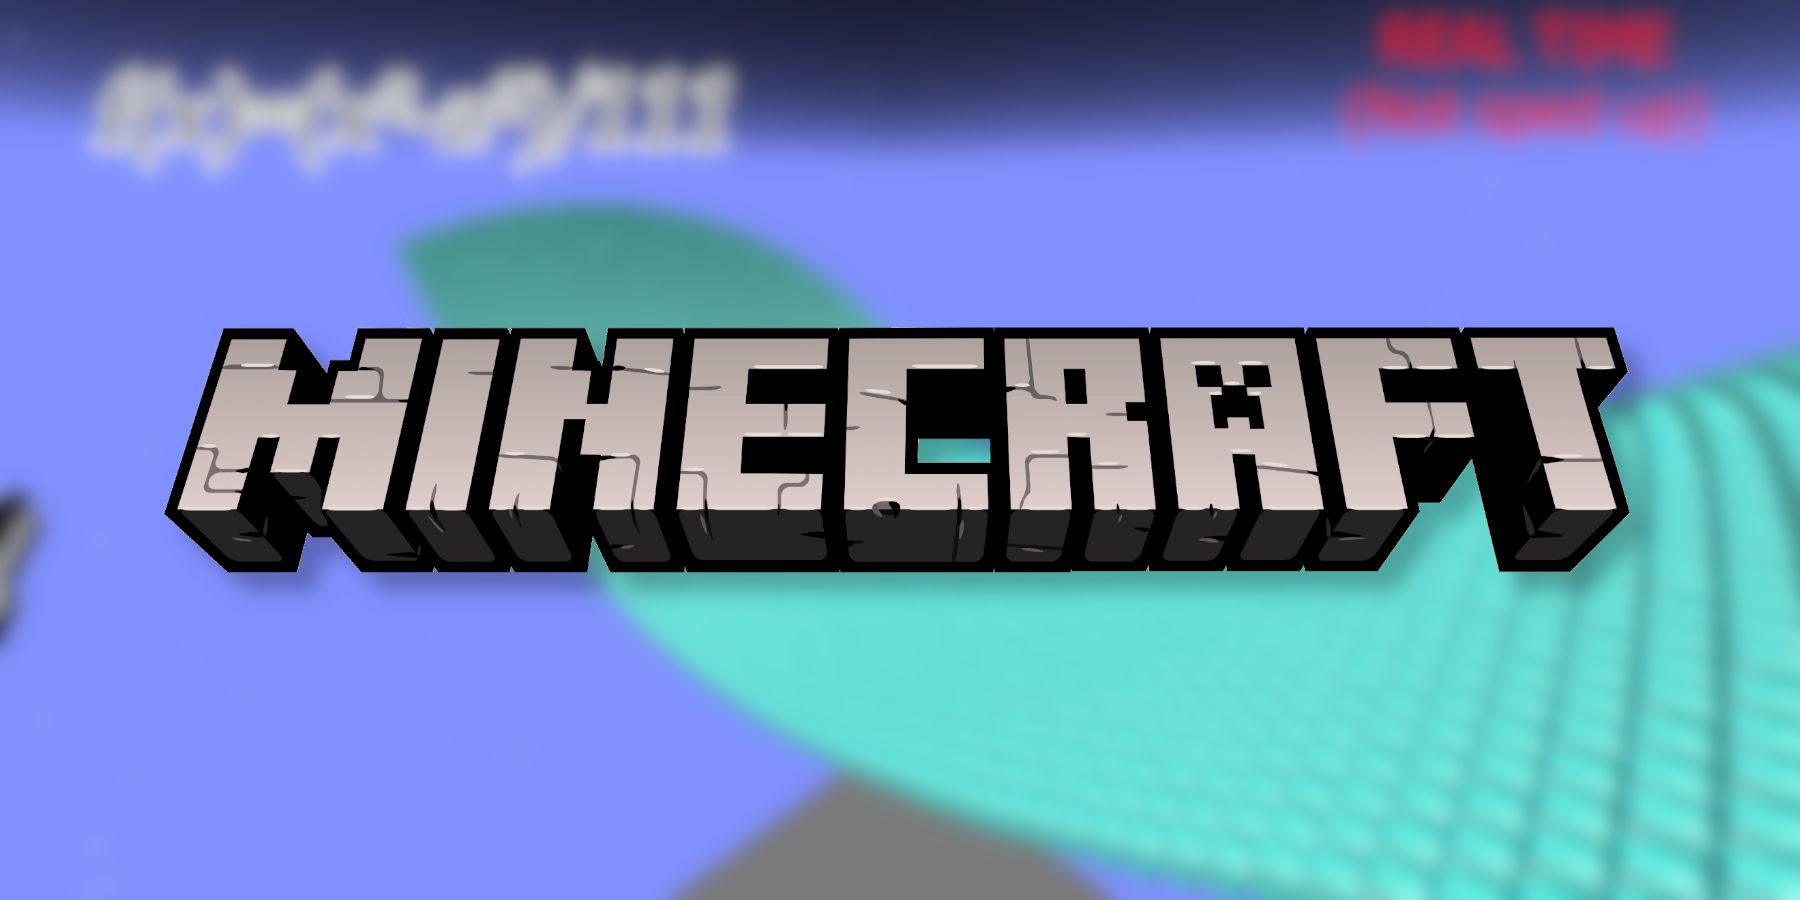 The Minecraft logo with a blurry graphing calculator in the background.